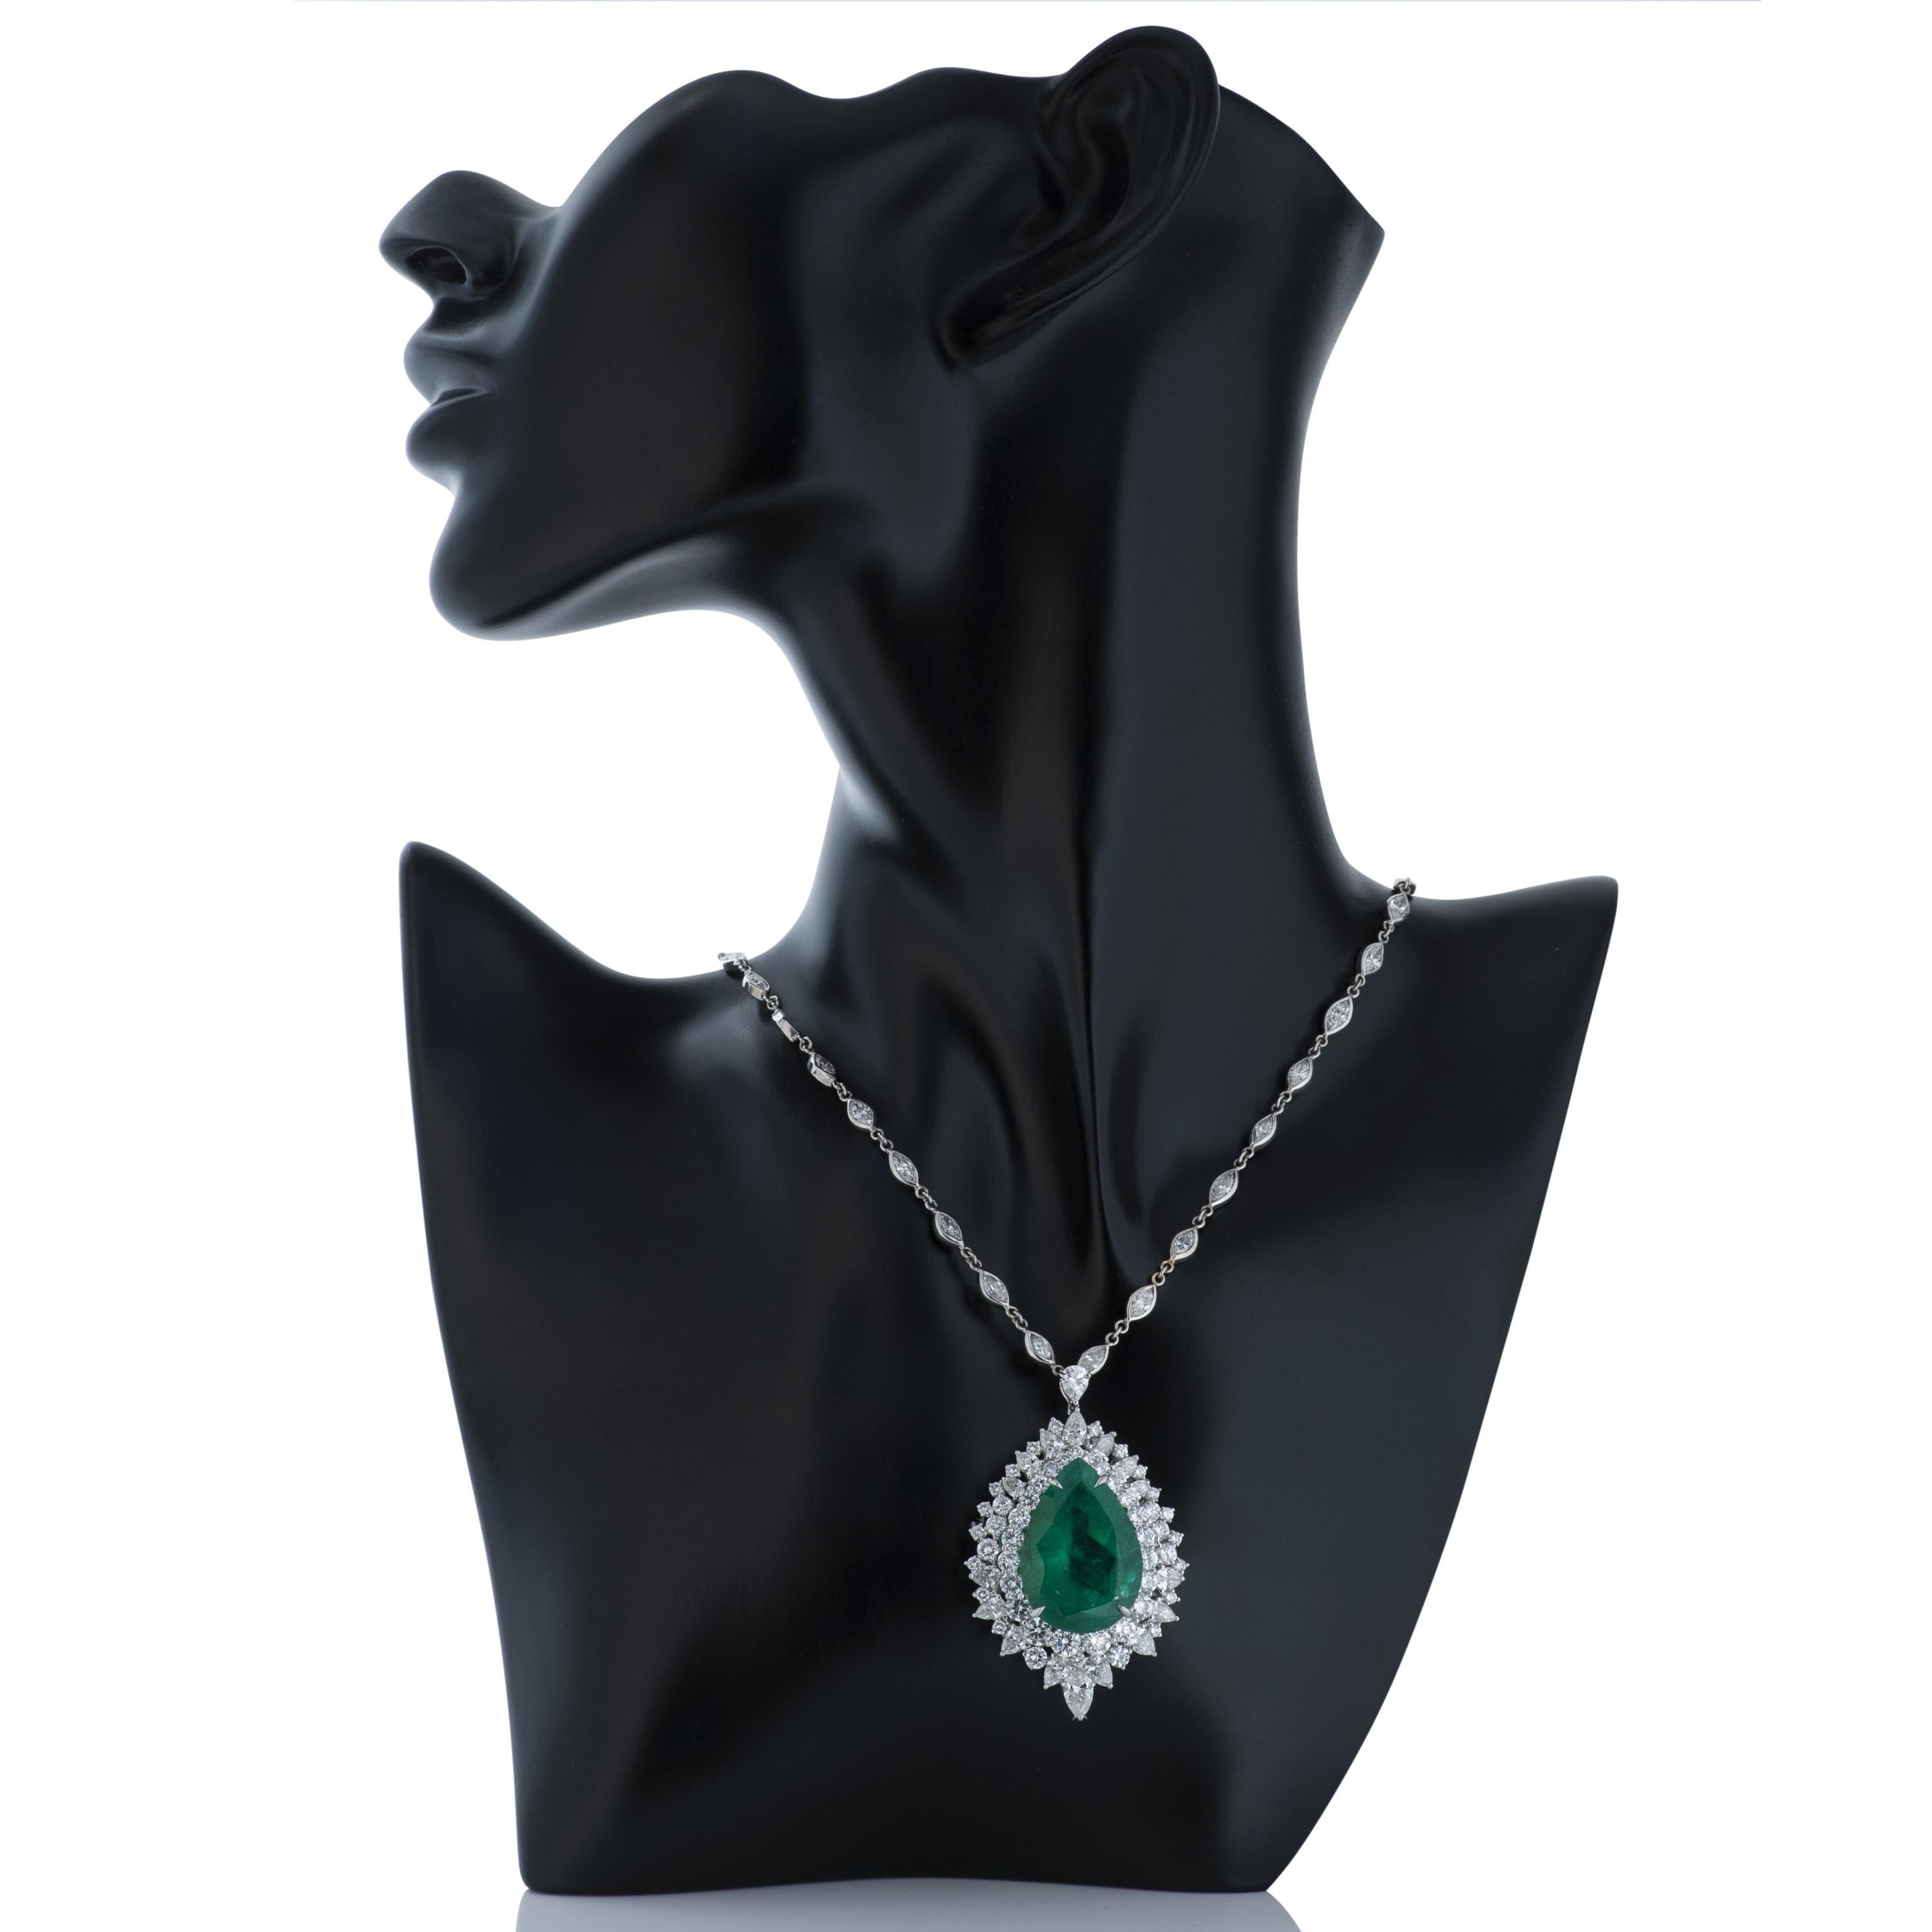 Platinum Colombian emerald and diamond pendant hanging from an 18k white gold marquise shape diamond by the yard style chain.  

This pendant contains a GIA certified 31.98 carat pear shape Colombian emerald surrounded by 17 pear shape and 50 round